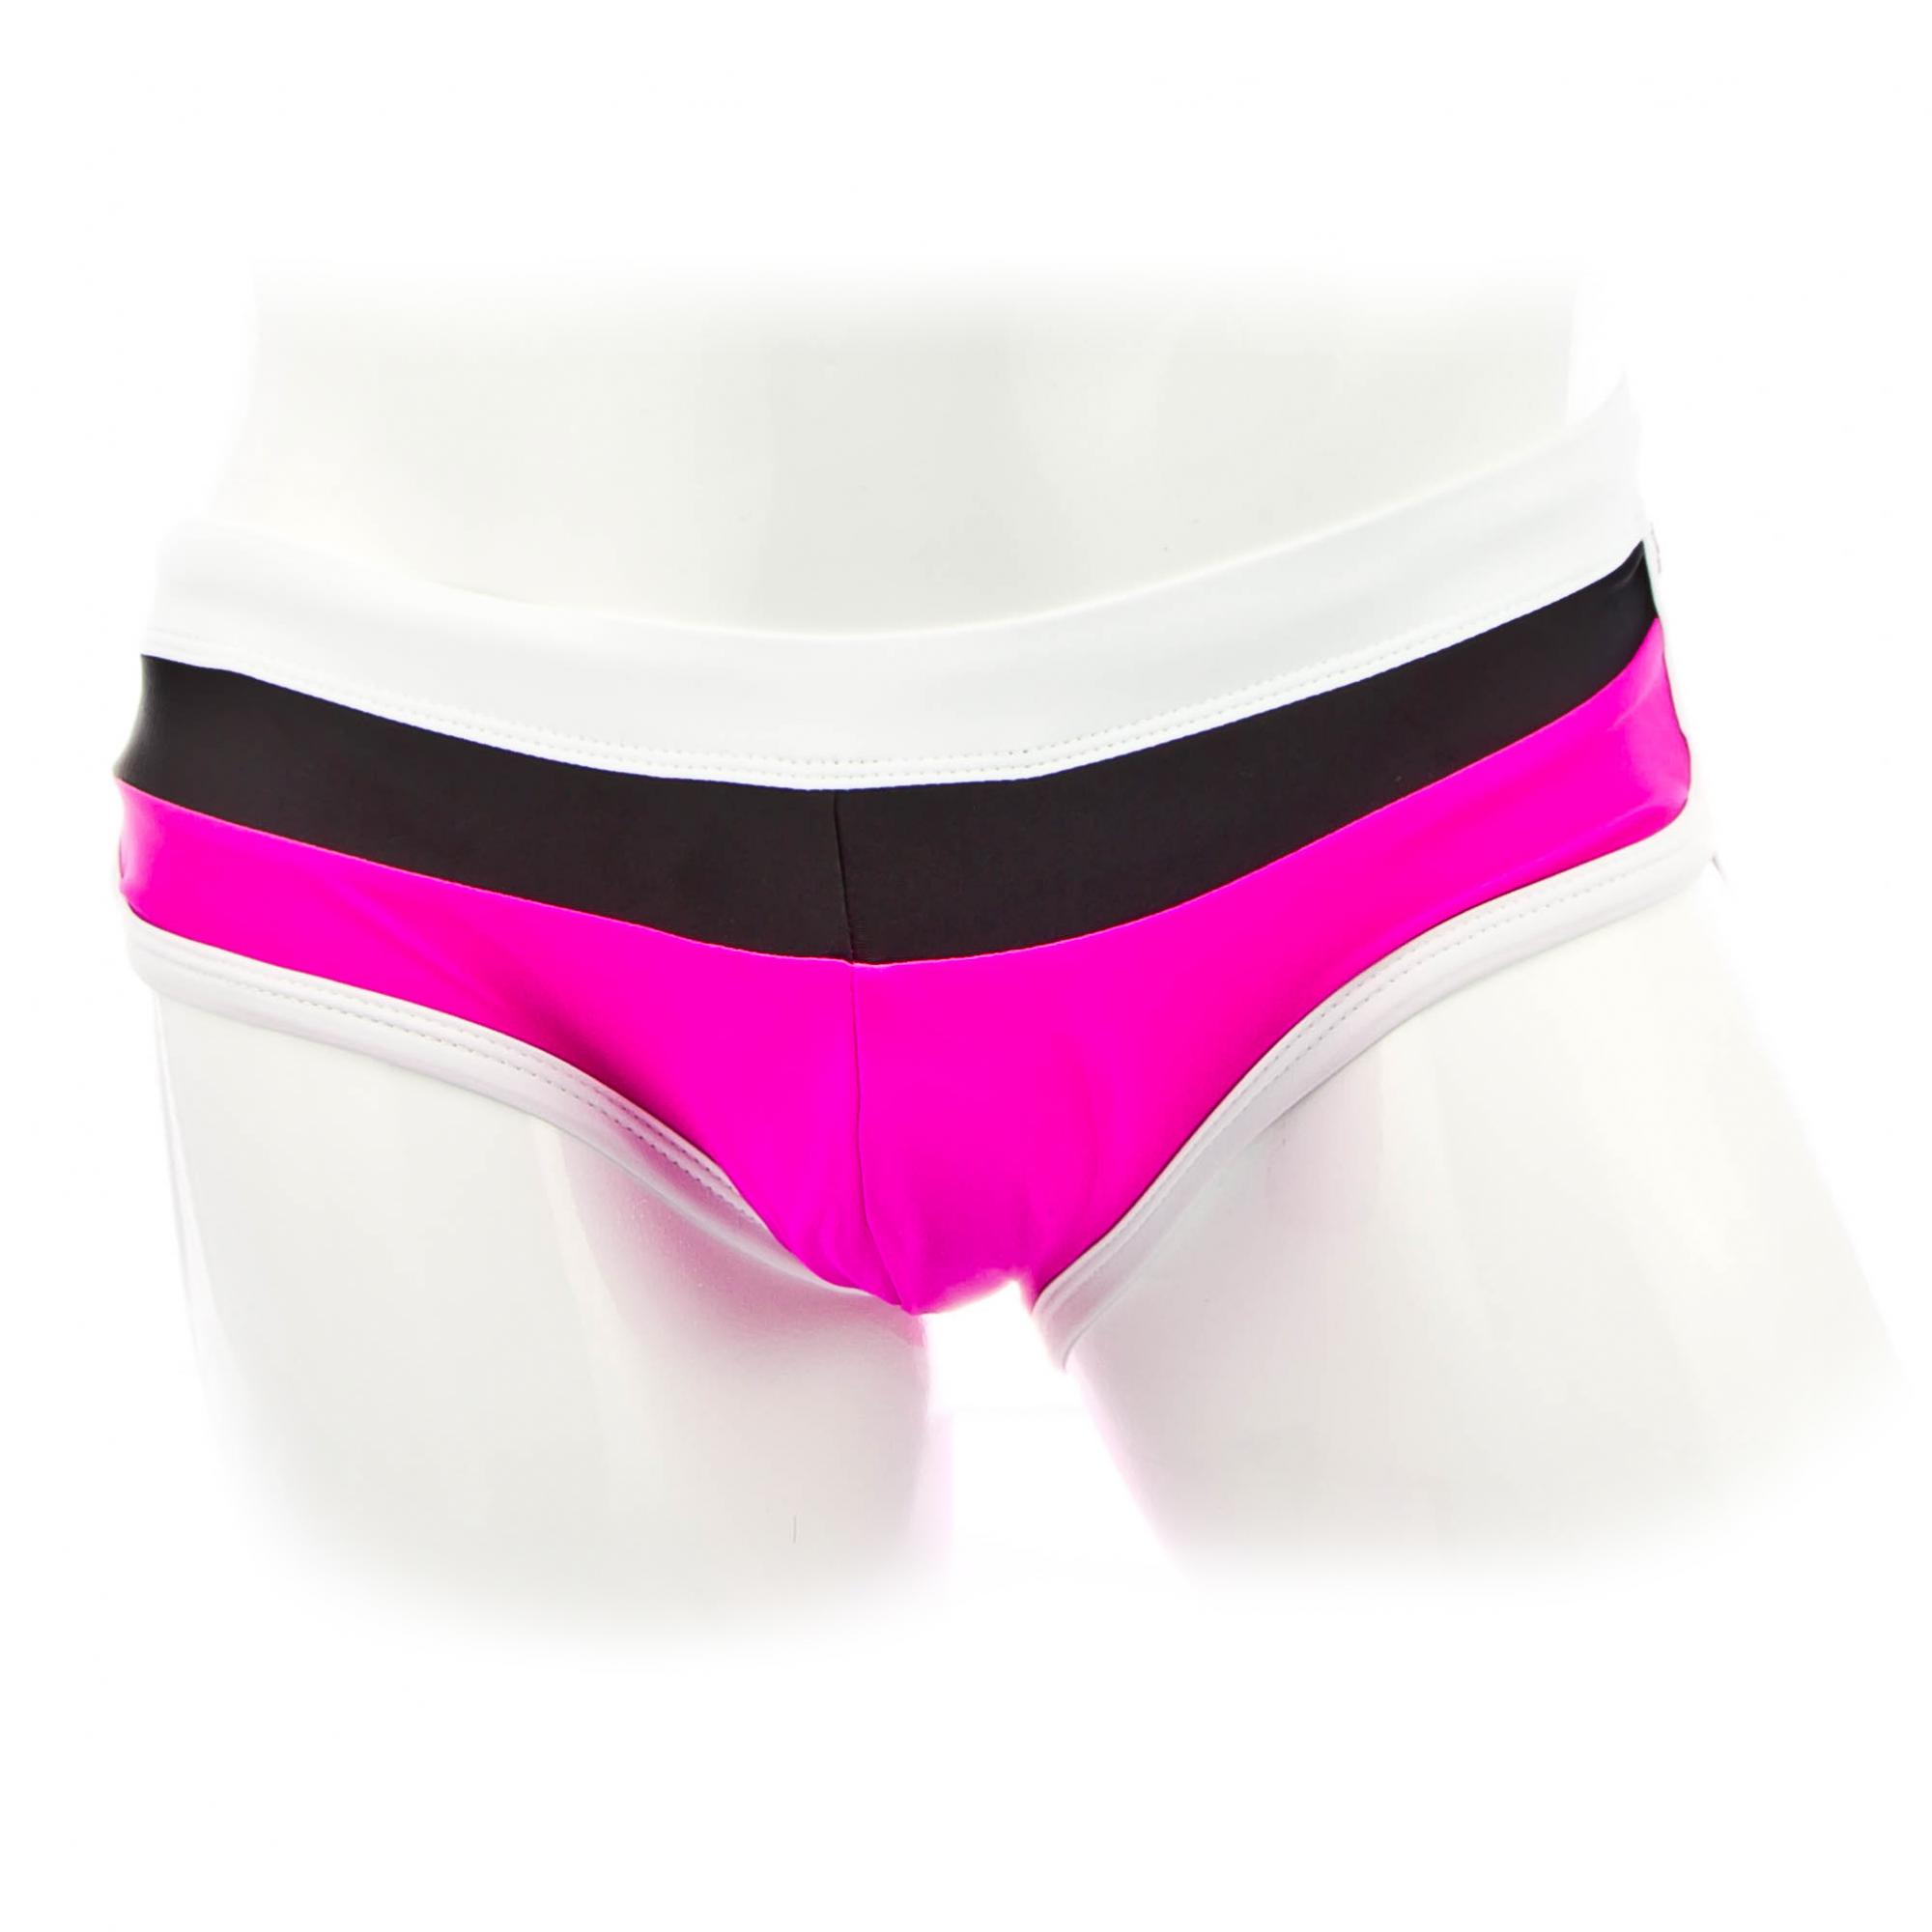 Shop men's underwear online in Australia at AlexanderS, Australia's online men's underwear store with trunks, briefs, jockstraps, g-strings and more.